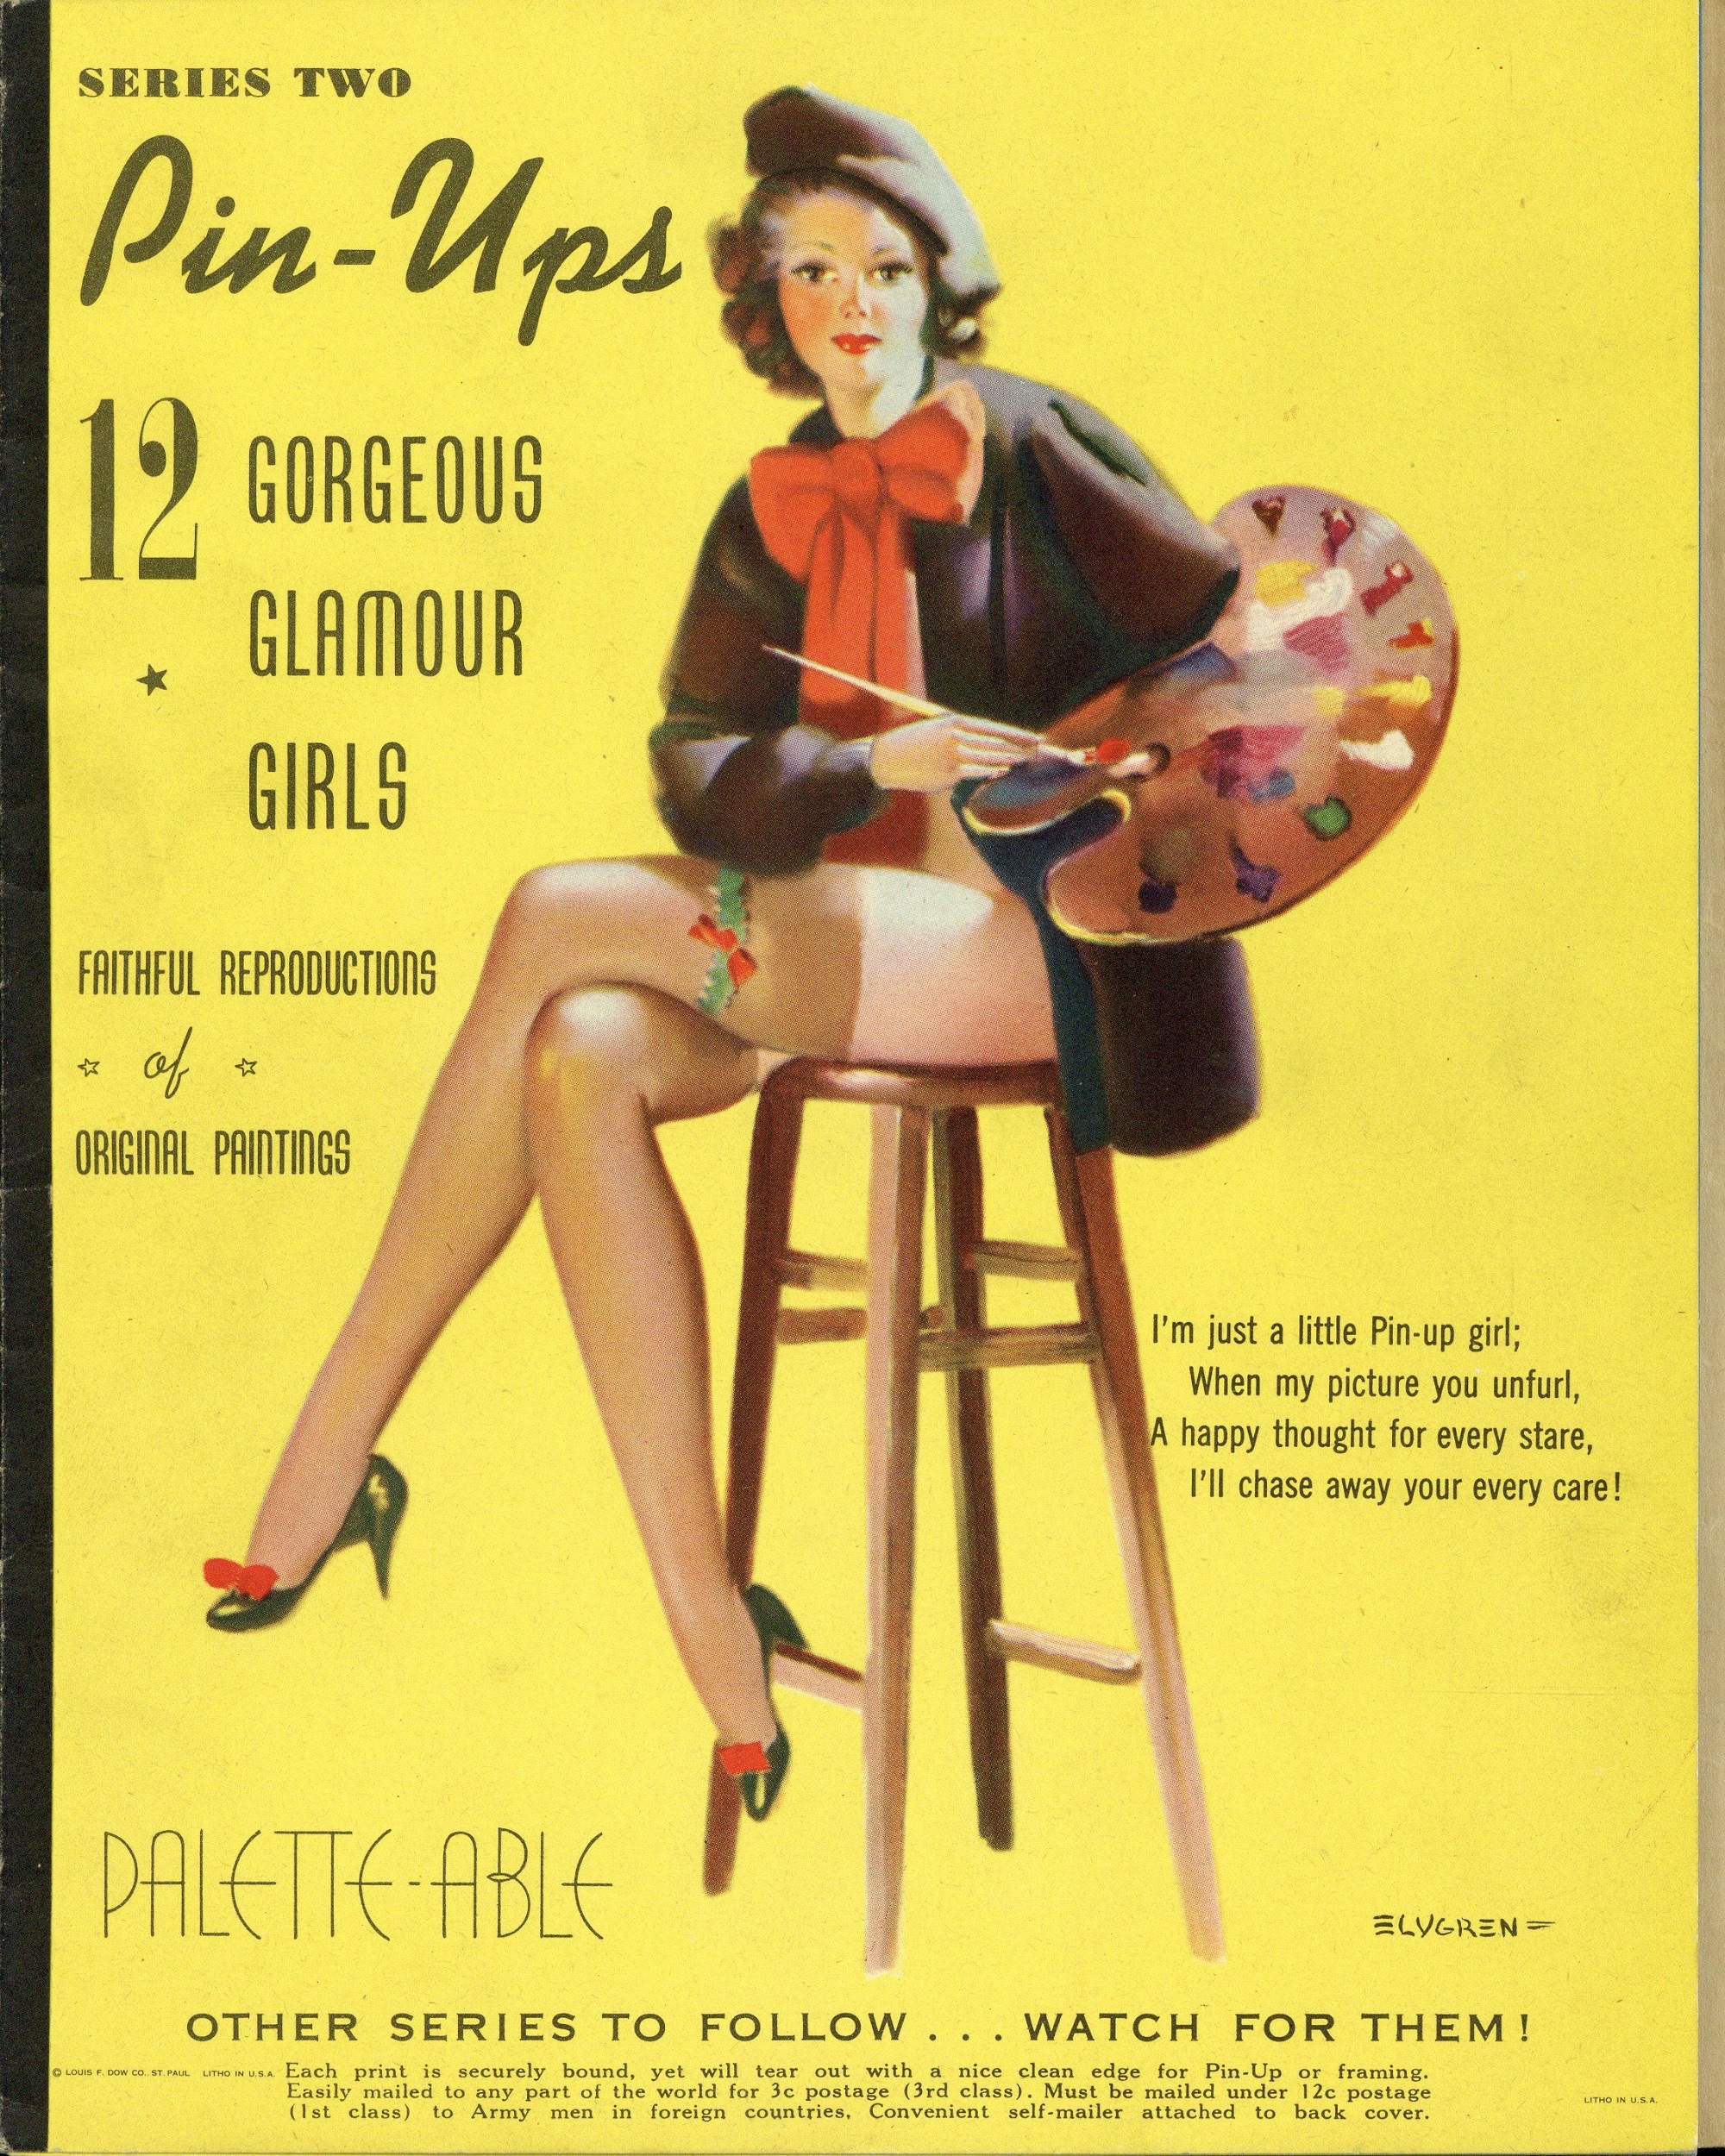 Cover of "Pin-Ups" magazine, showing a woman against a yellow background, seated on a stool, wearing thigh-high stockings, a black smock with a red bow, and a beret, holding a painter's palette and paintbrush.